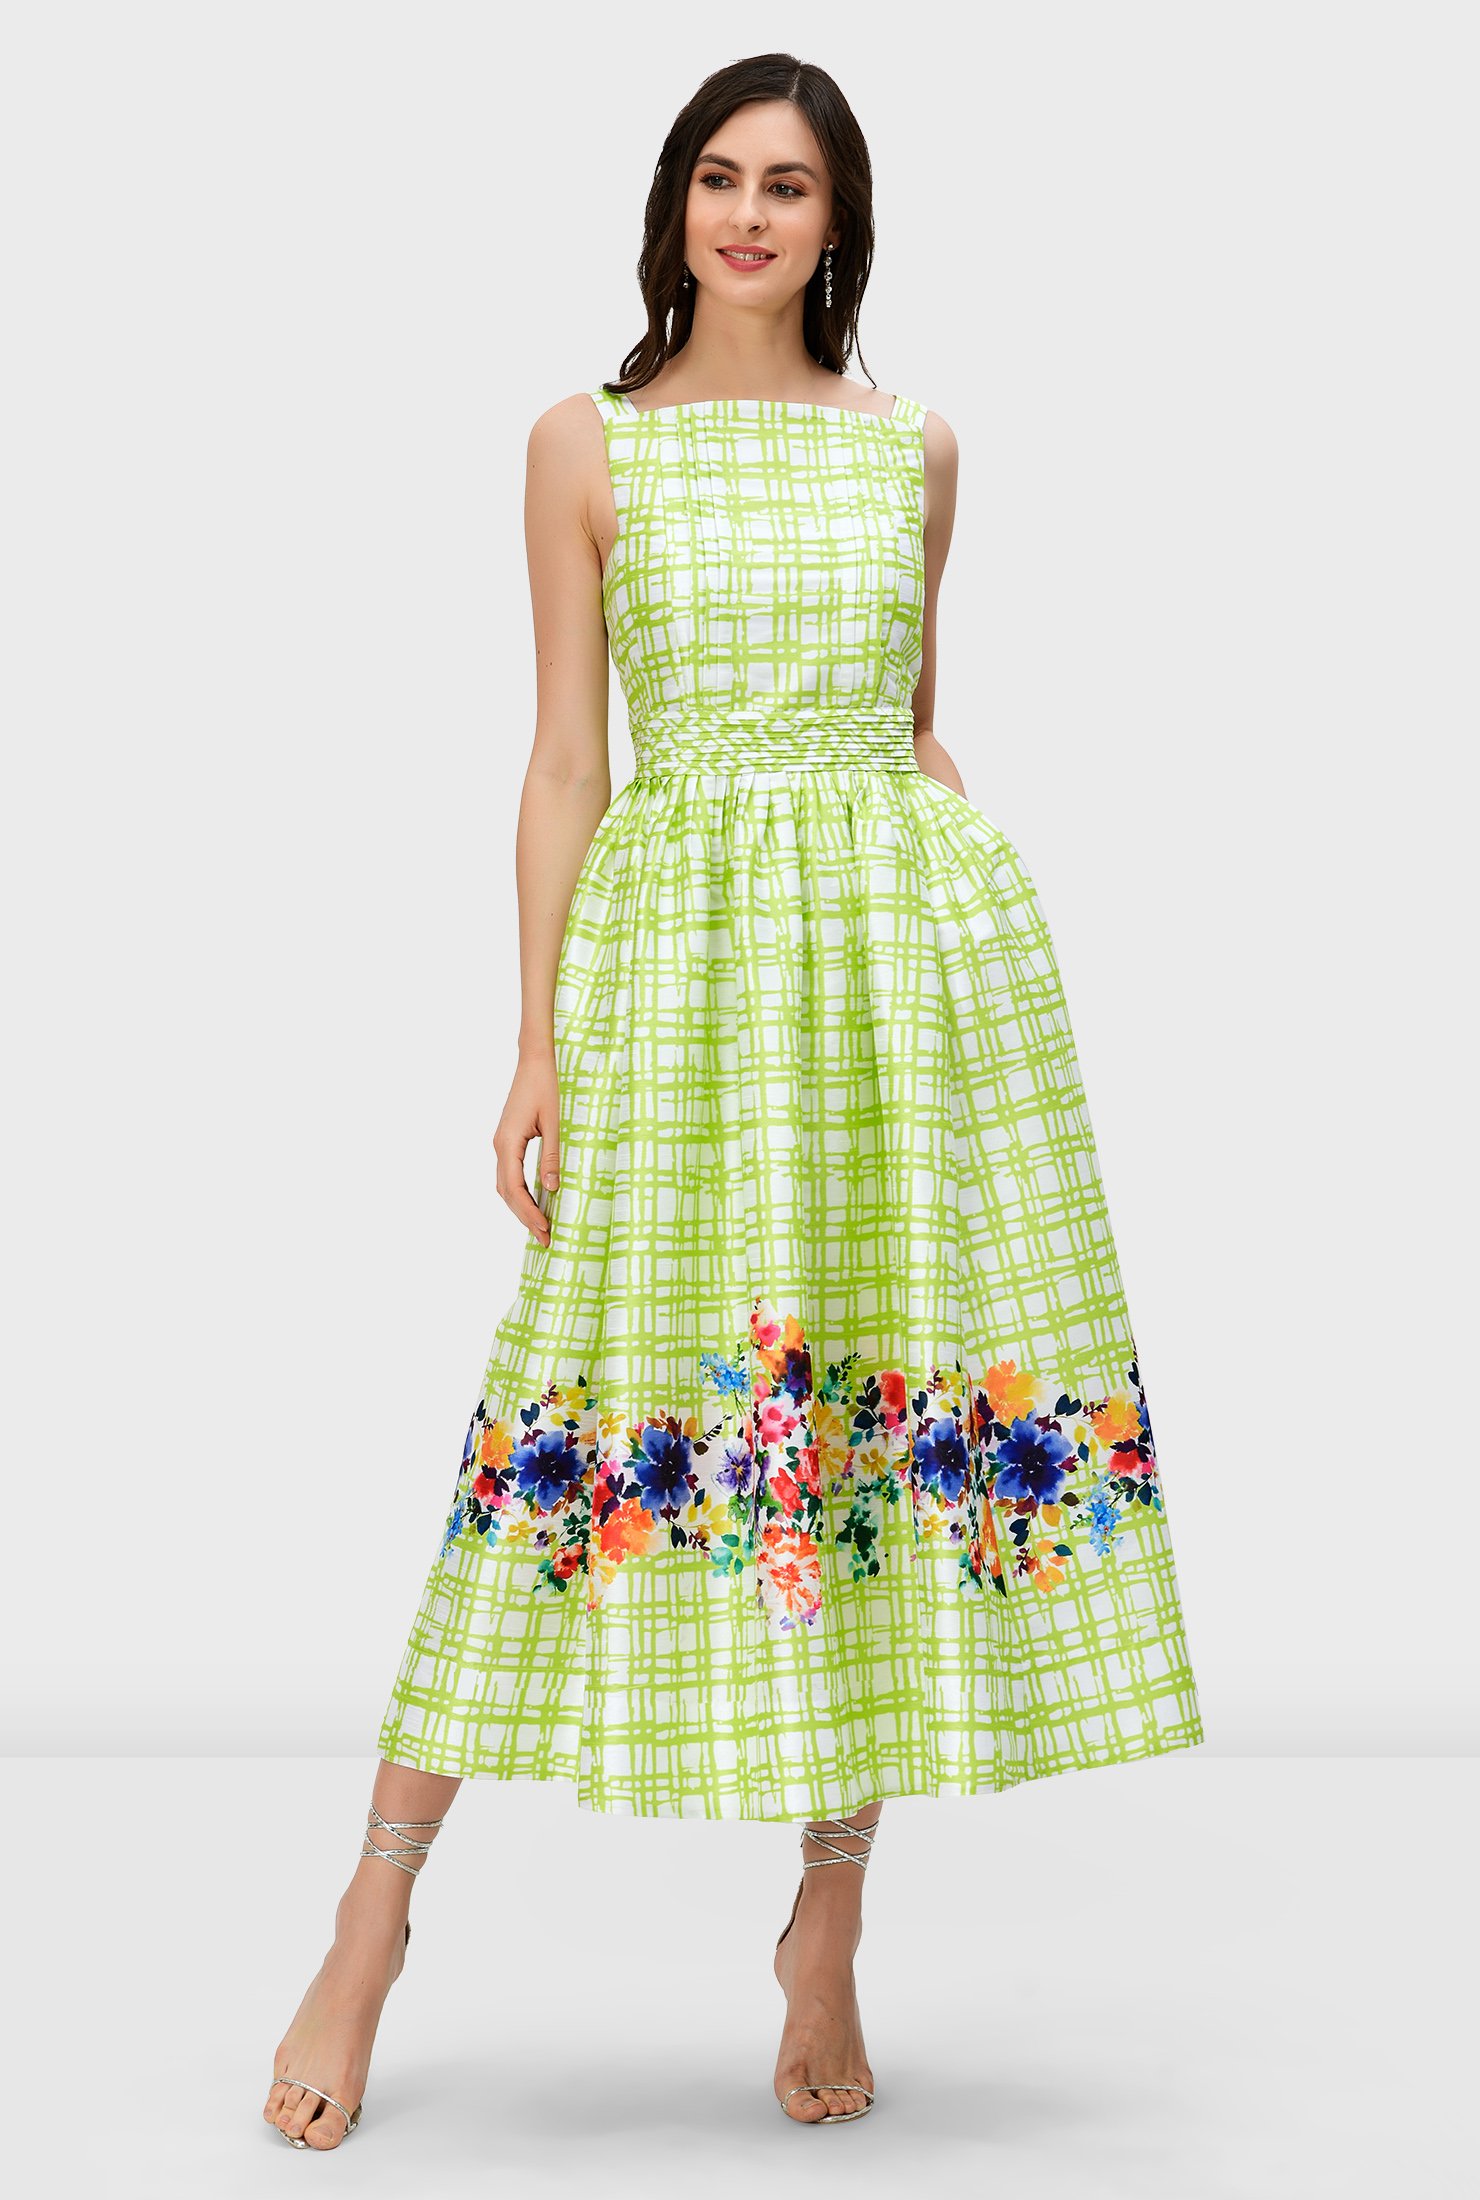 Watercolor florals pop up in vibrant hues on our check print polydupioni dress styled with a fitted bodice and full flared skirt while a trapunto banded waist cinches in the flattering silhouette.